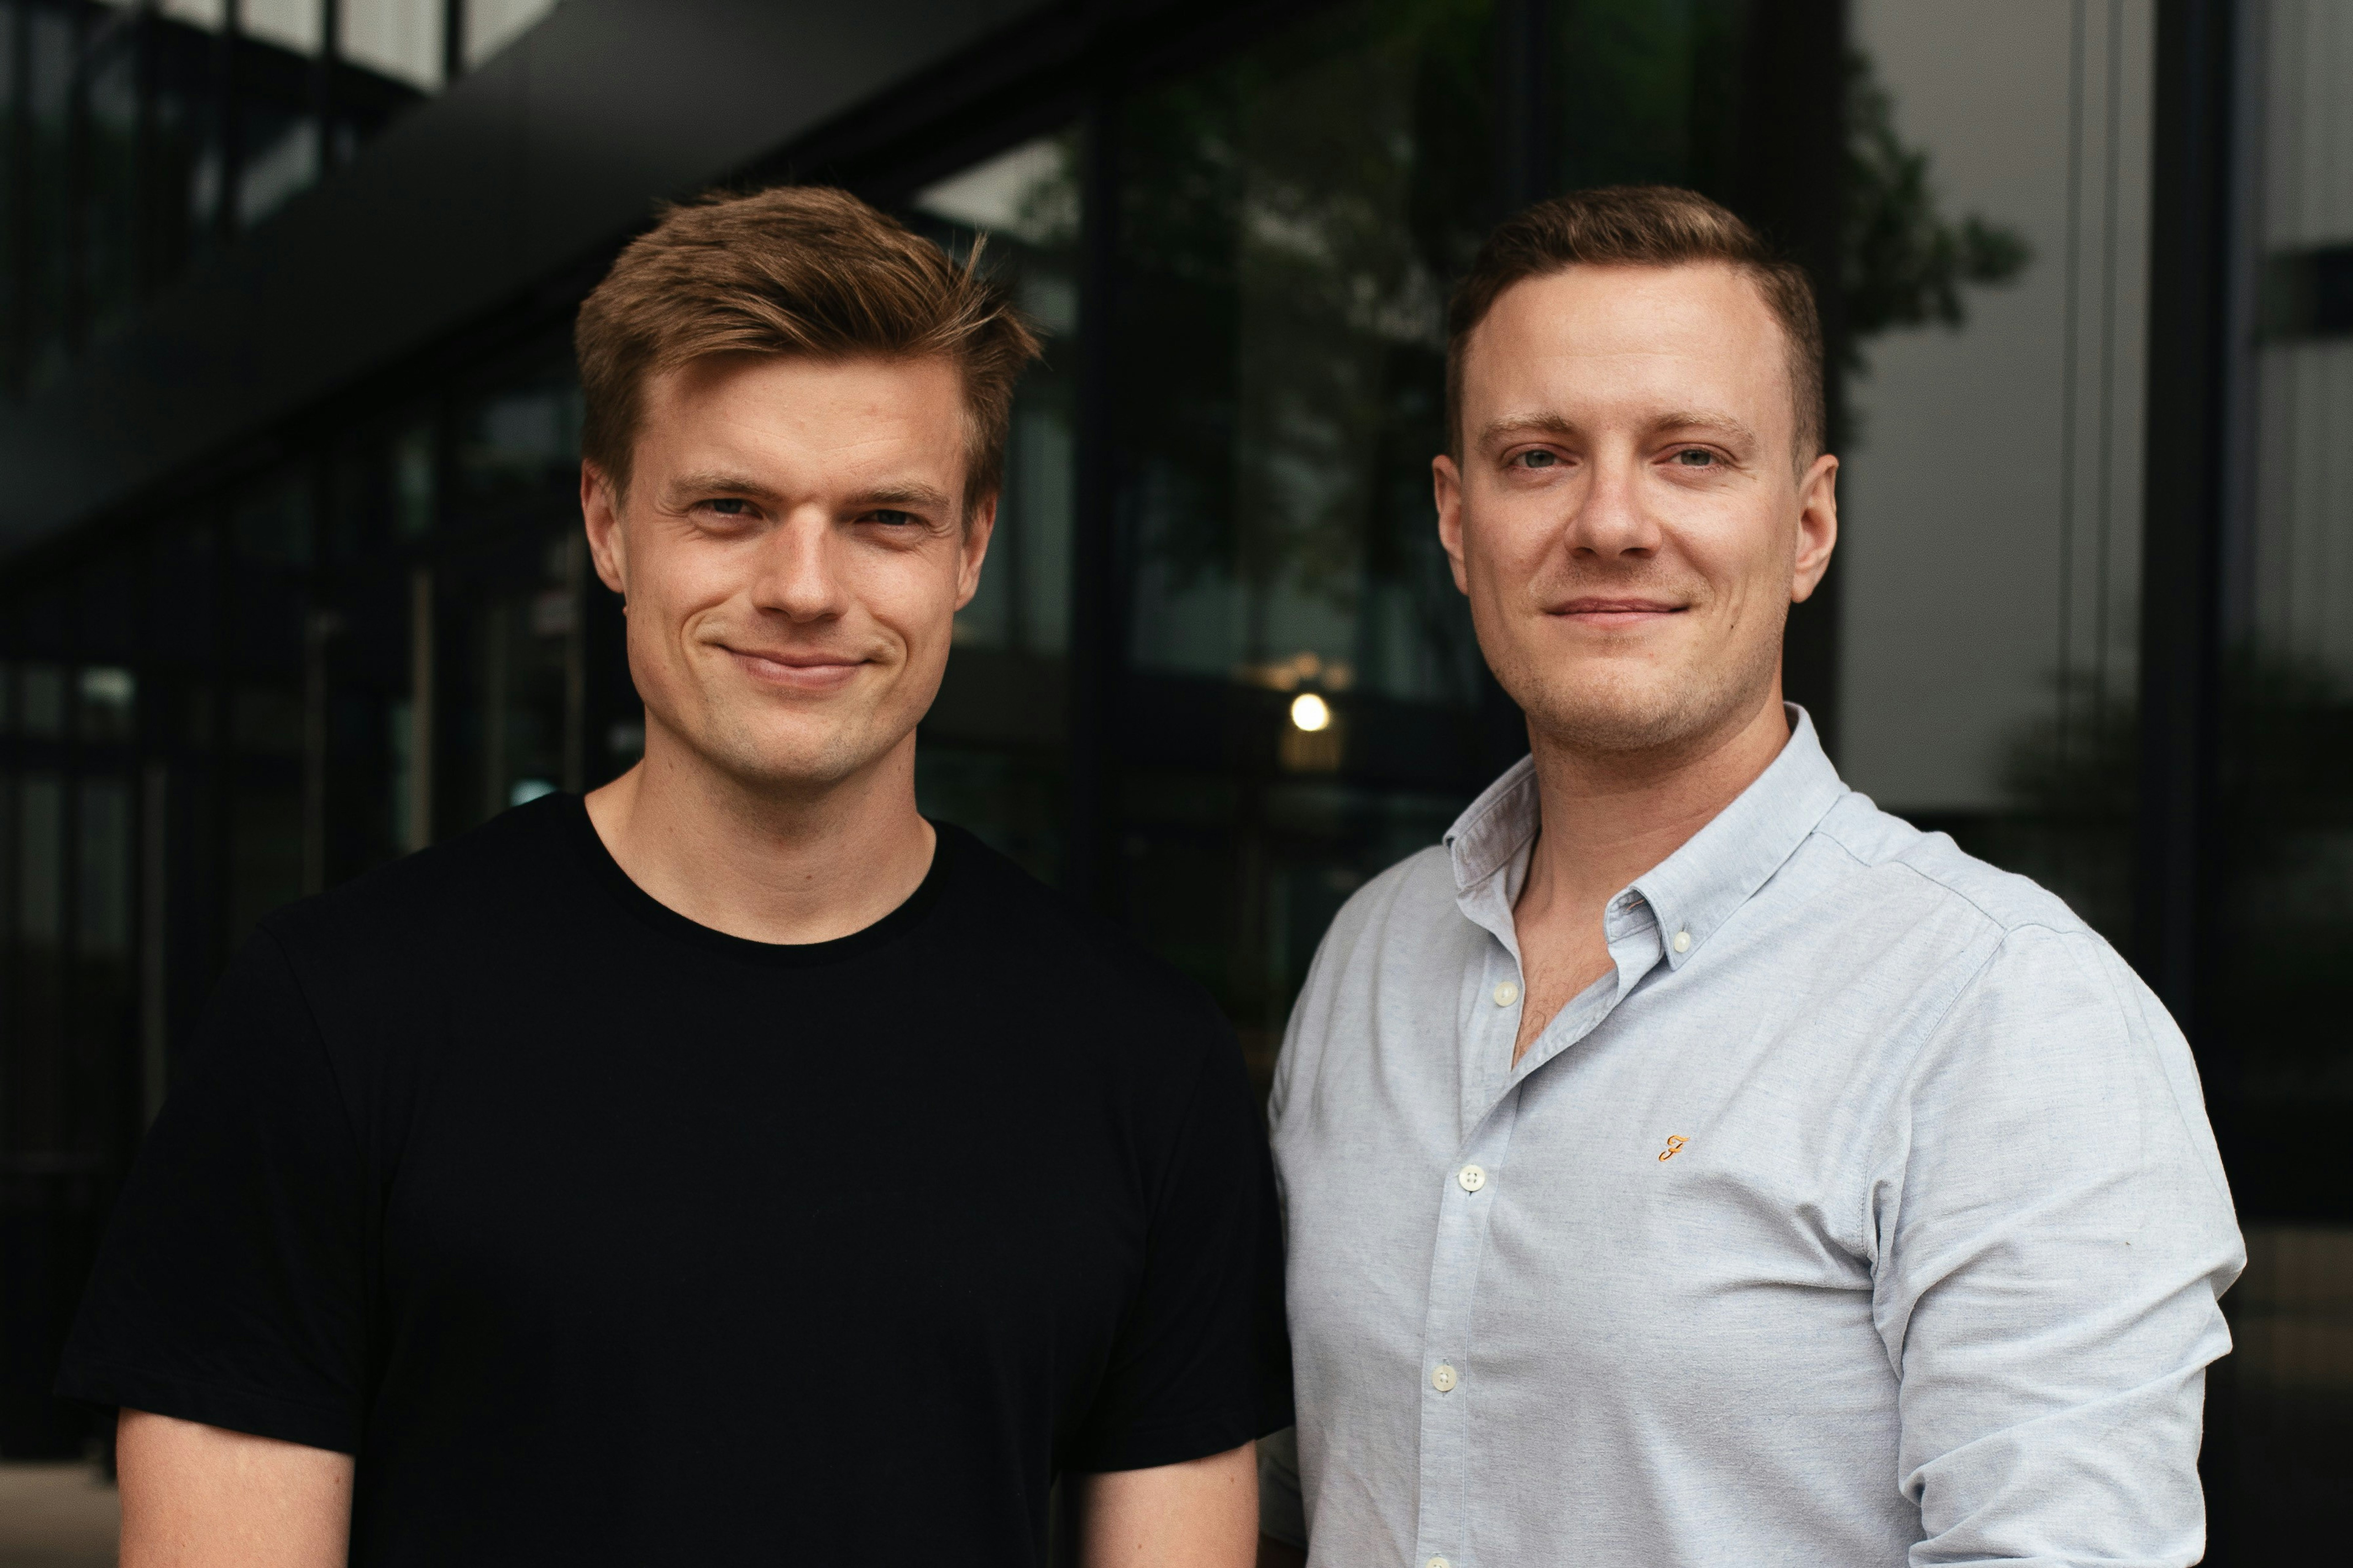 Sastrify's founders Maximilian Messing (left) and Sven Lackinger (right)